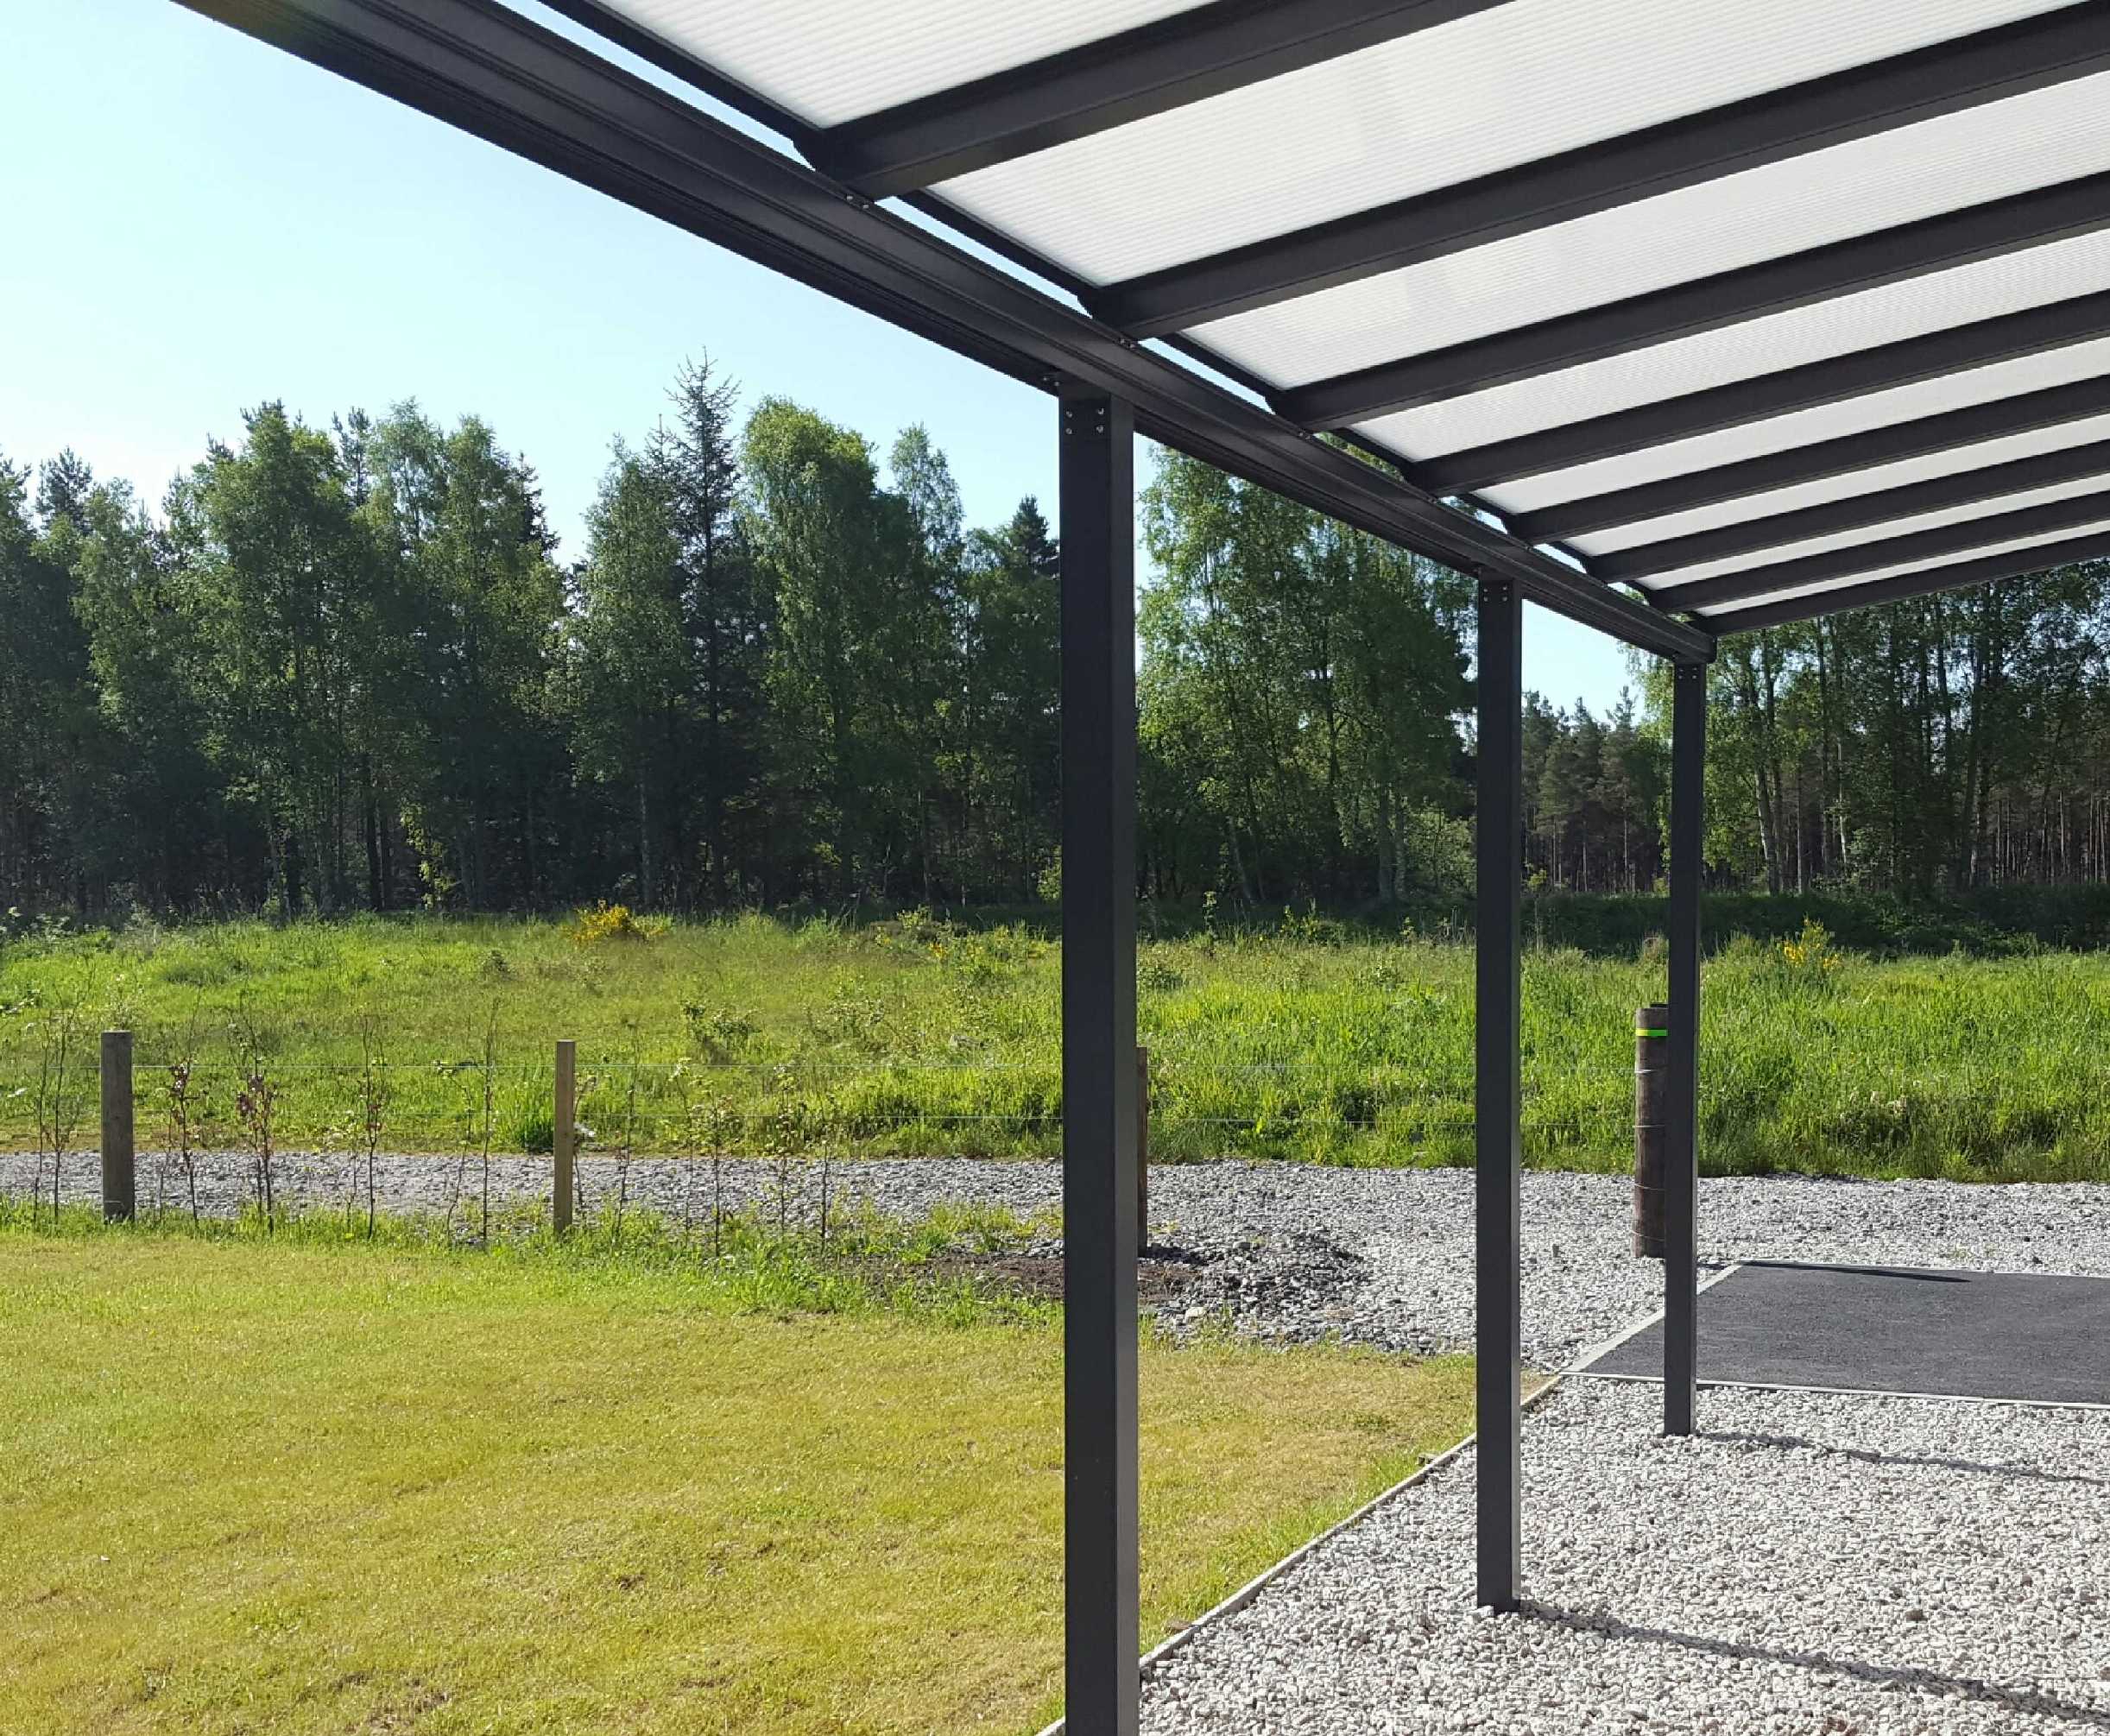 Omega Smart Lean-To Canopy, Anthracite Grey, UNGLAZED for 6mm Glazing - 7.0m (W) x 2.0m (P), (4) Supporting Posts